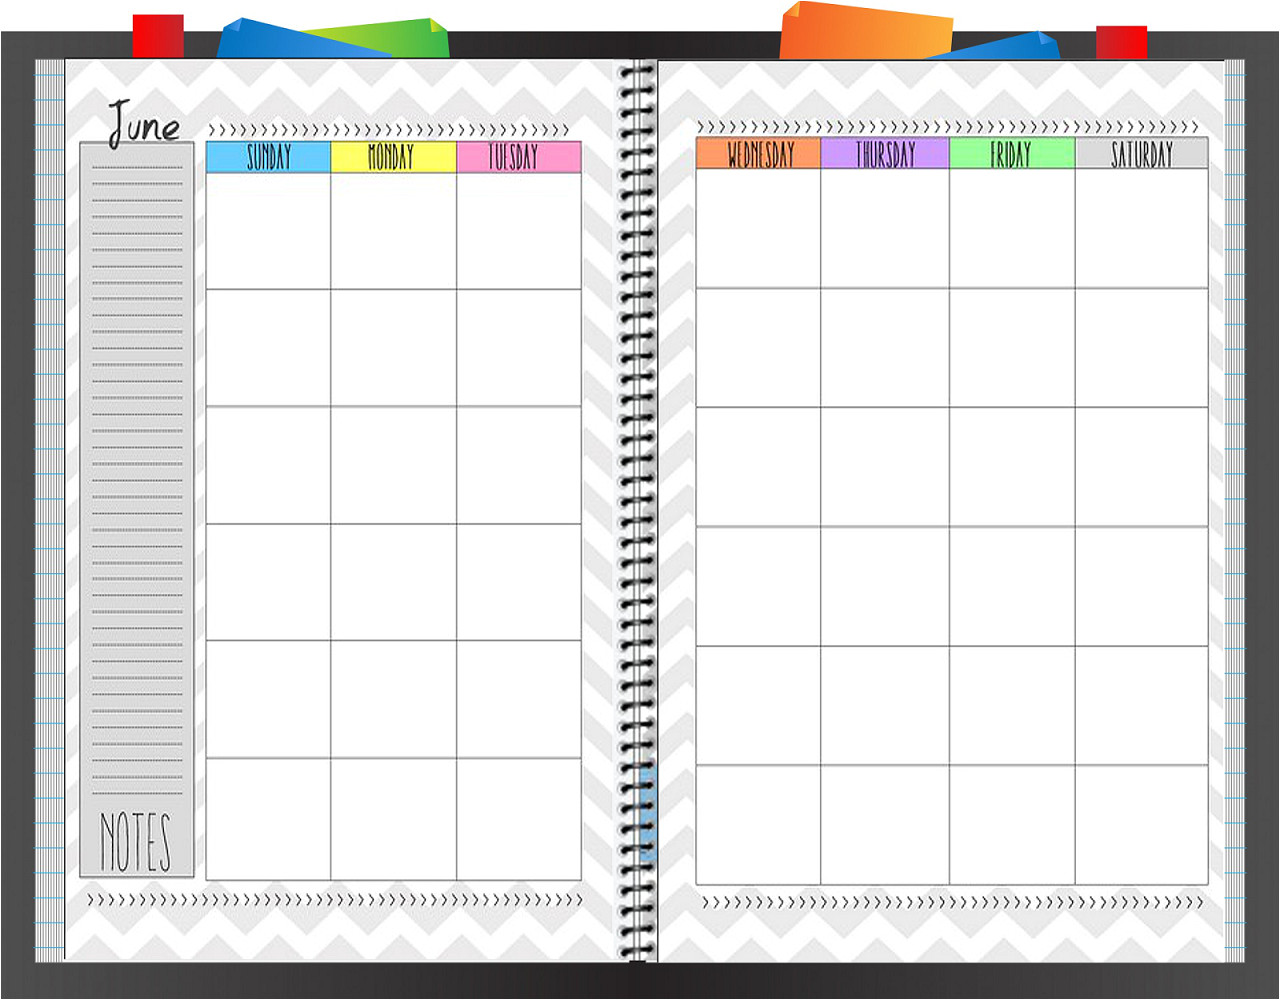 monthly budget planner template 1 2